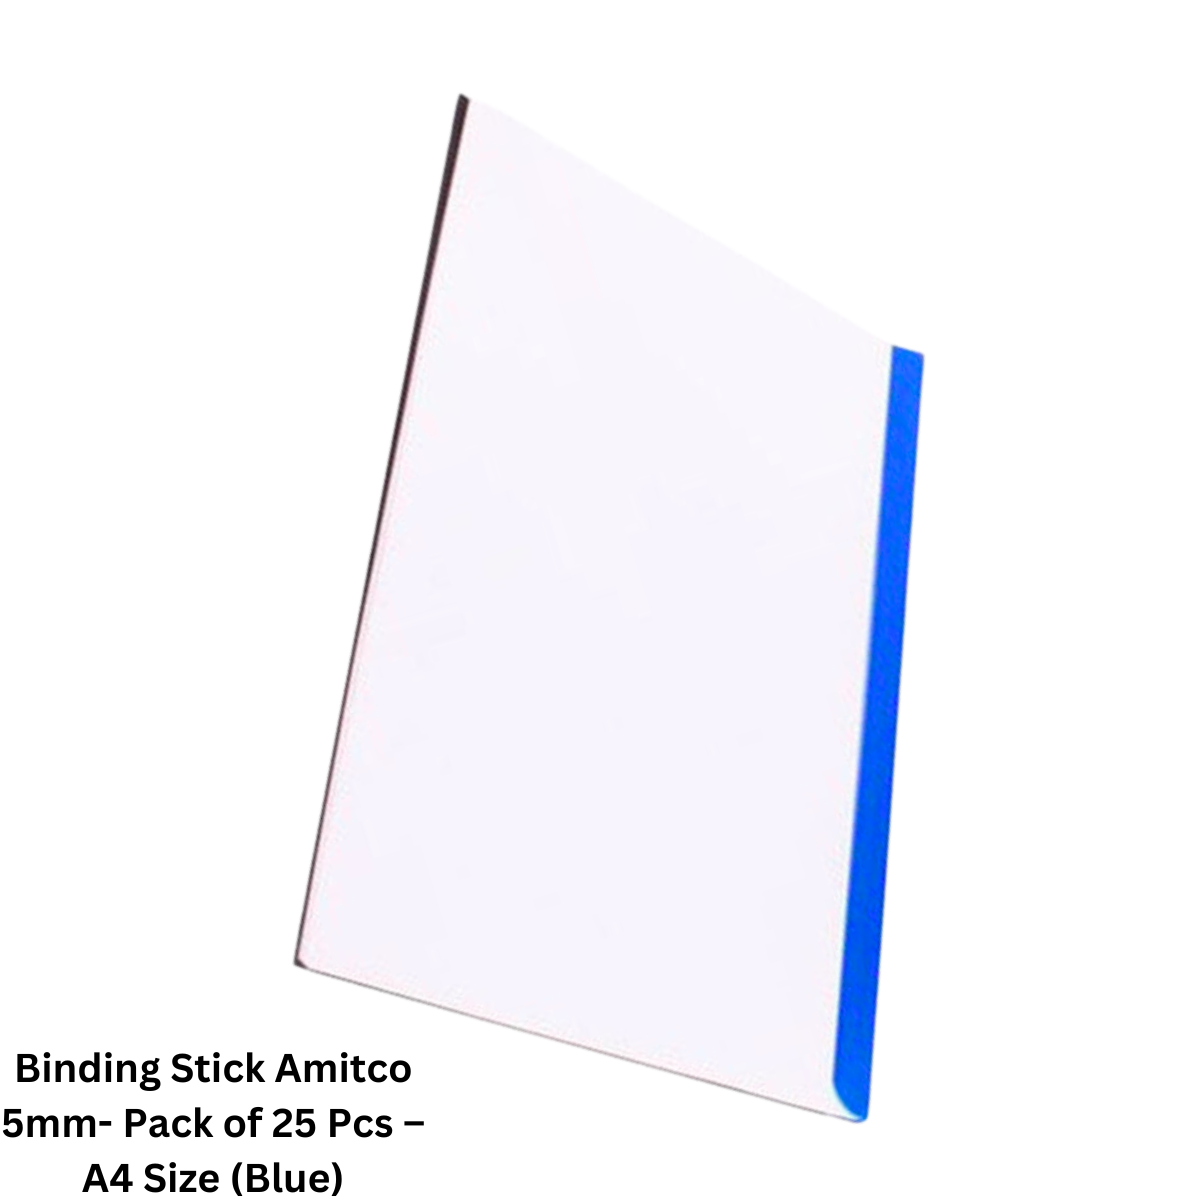 Pack of 25 Amitco 5mm binding sticks in assorted colors (black, blue, white), suitable for binding A4-sized documents.